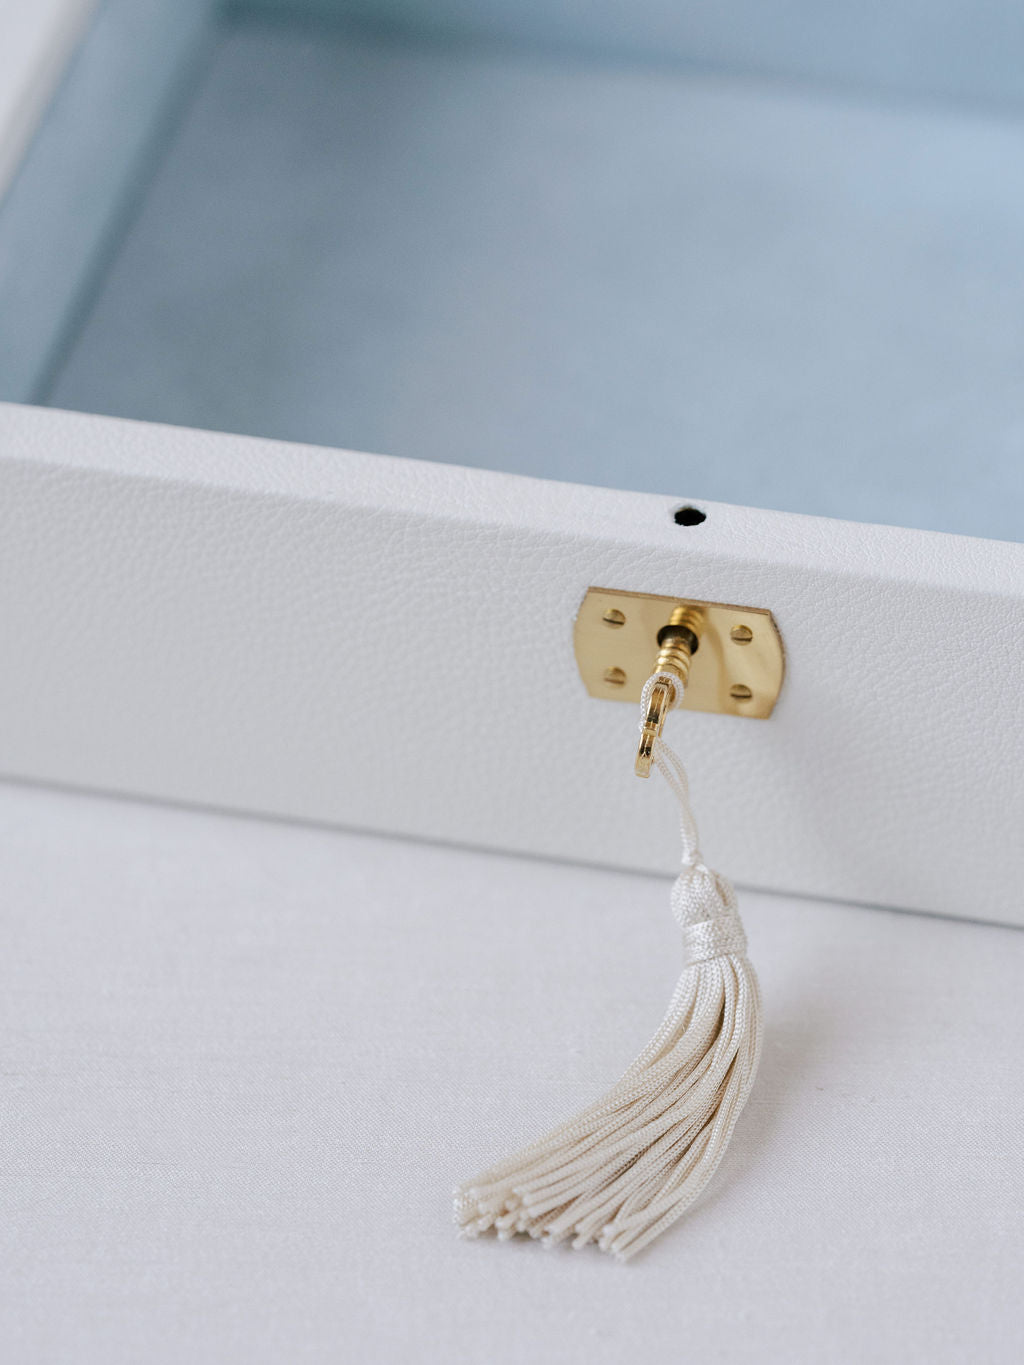 Close up image of the white Italian leather wedding keepsake box. Shown is the gold accented key with tassel inserted into the key hold. Box is open with blue suede interior and can hold all wedding day mementos.